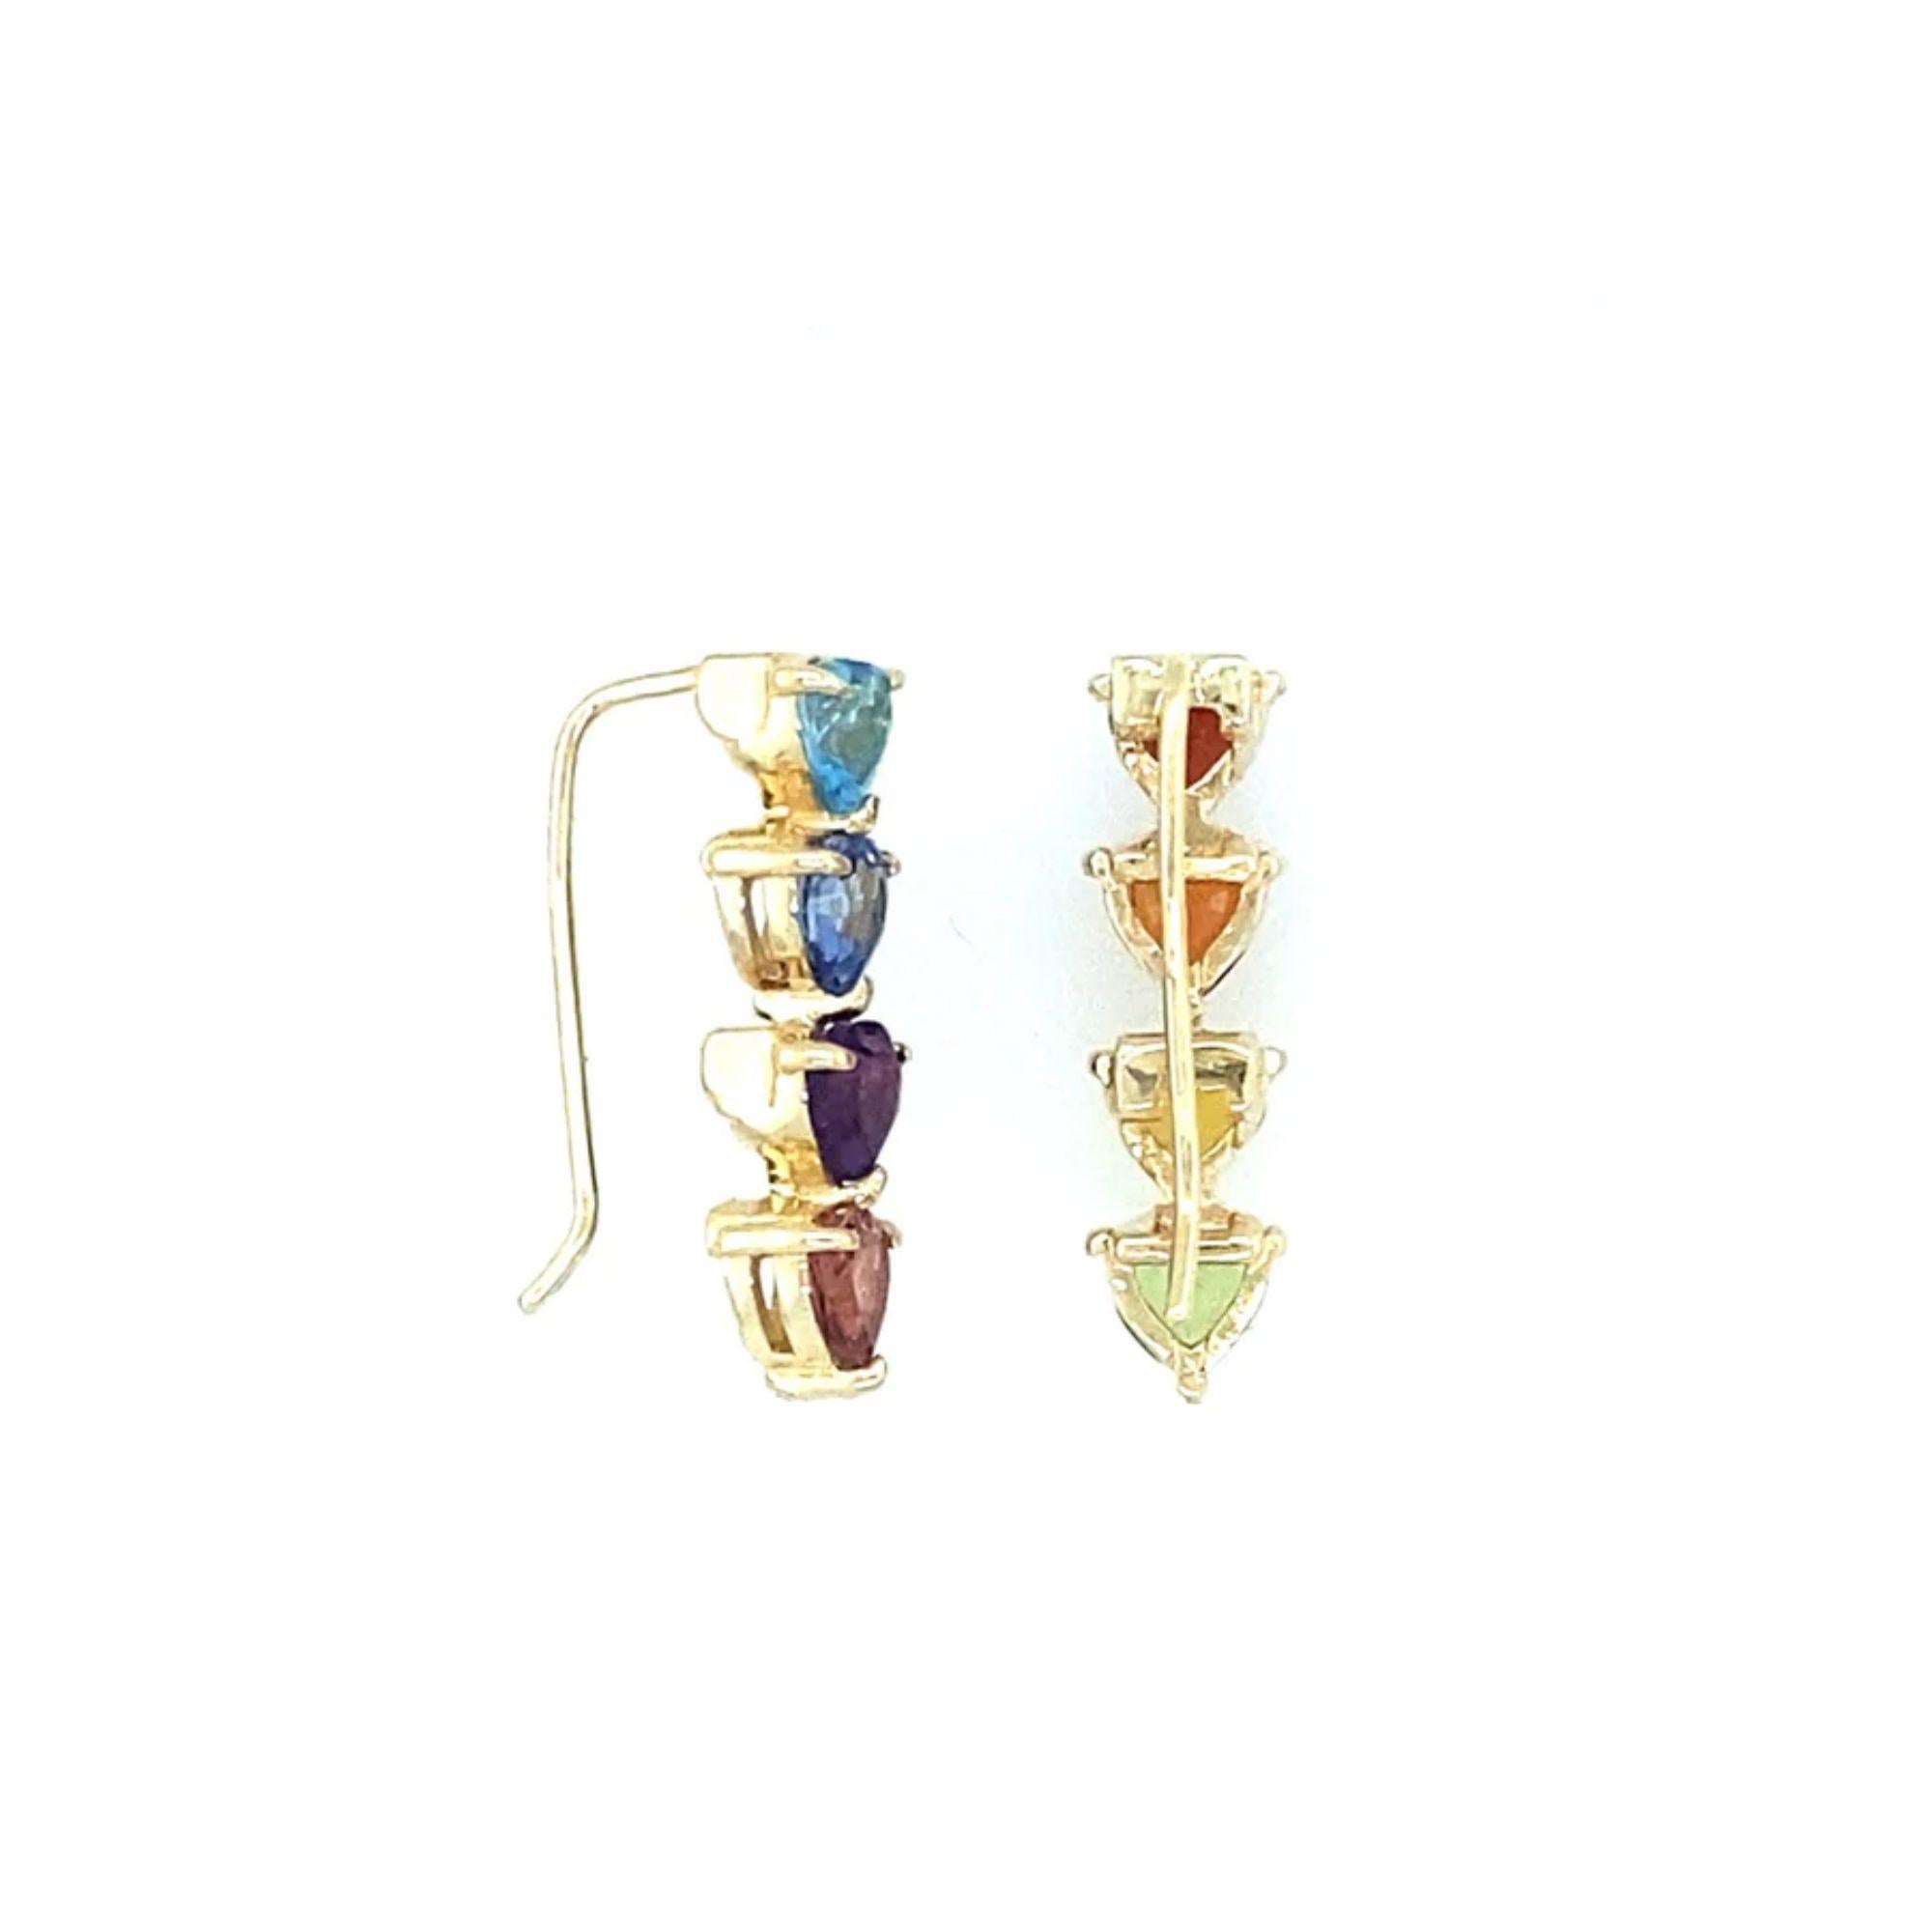 Drip in the full rainbow fantasy in the most unique and colorful ears climbers to light up your ears. These climbers are like no other and consists of heart settings with colored gems and sapphires in the classic Mordekai rainbow pattern. Can be